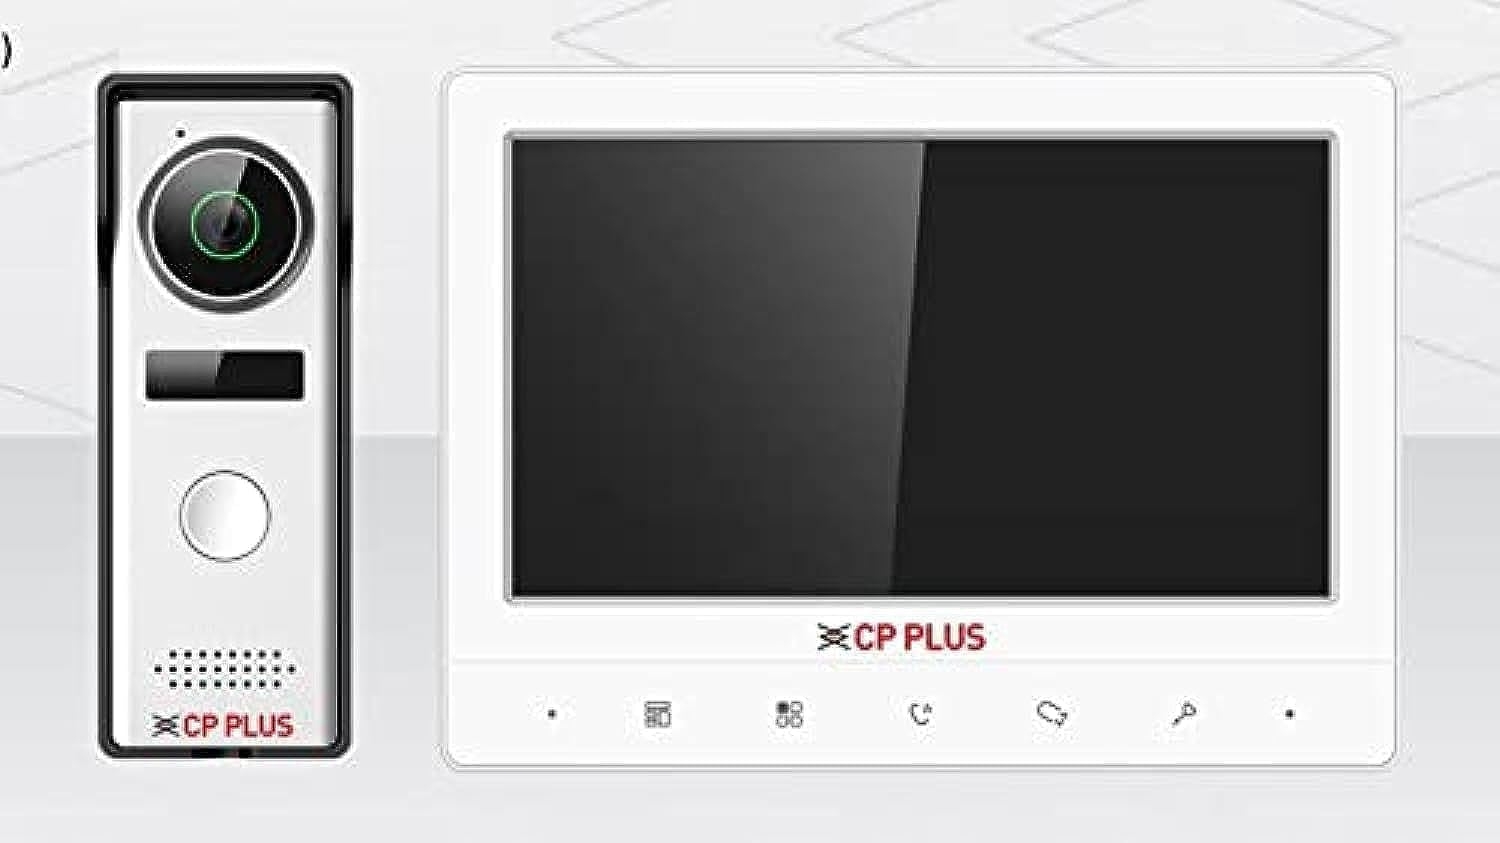 CP PLUS 7 TFT HD Resolution LCD Screen | Wired Video Door Phone | Waterproof Camera Touch Key Monitor | Intercom Kit